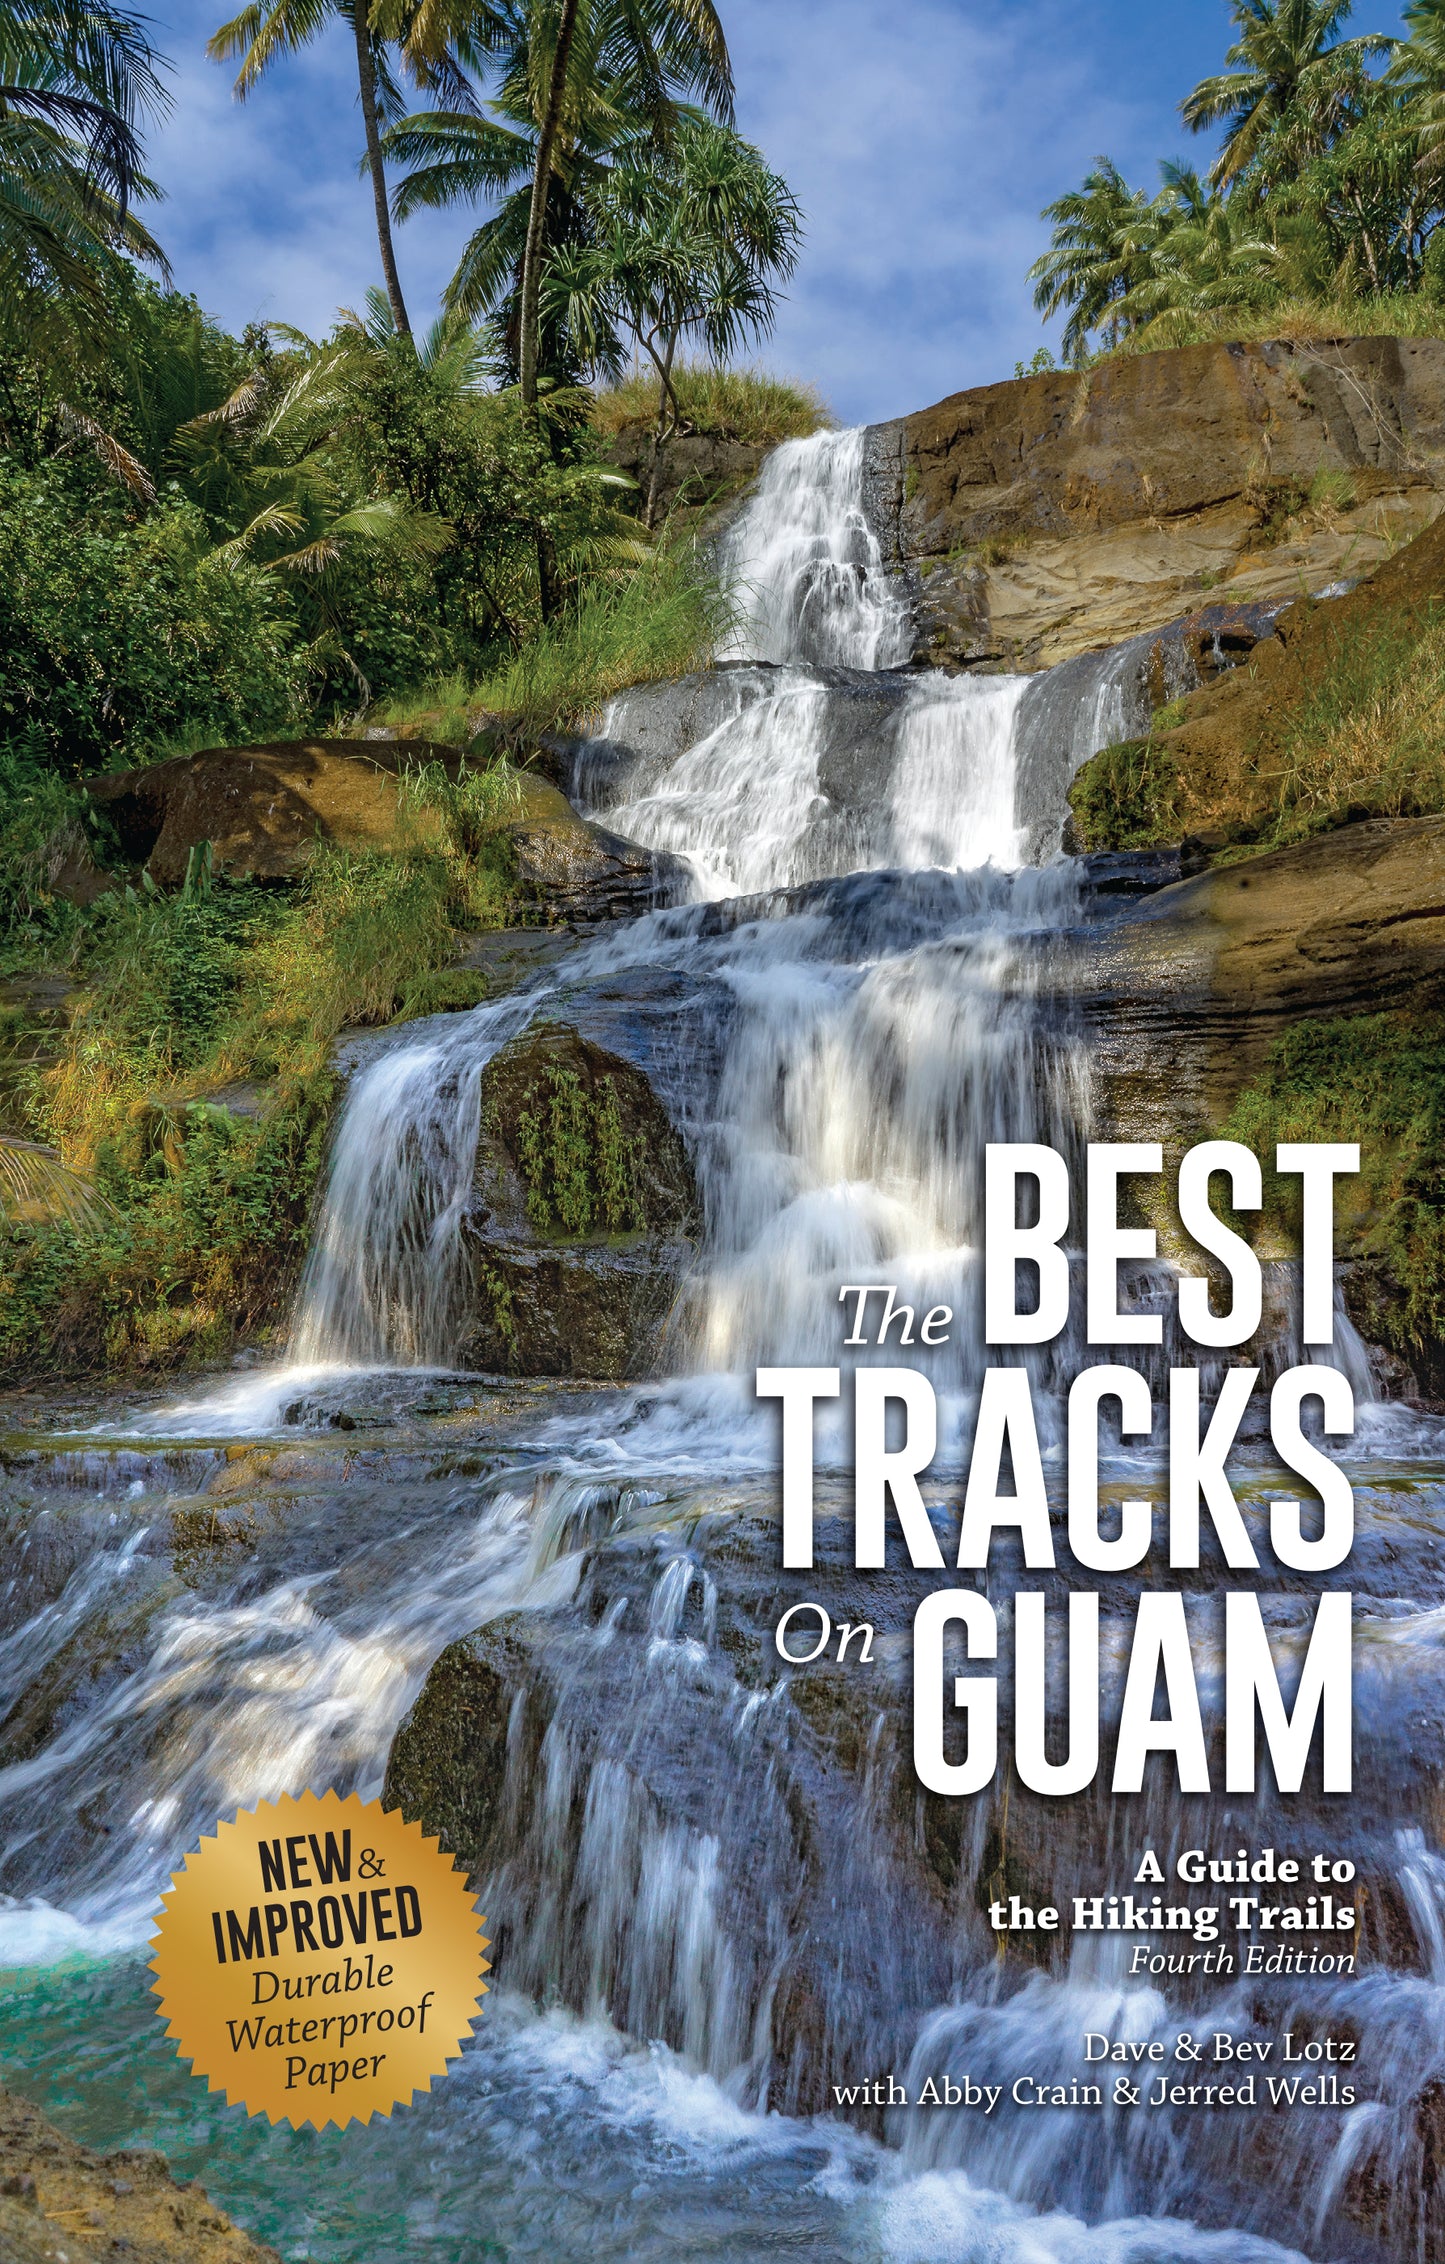 The Best Tracks on Guam, 4th Edition